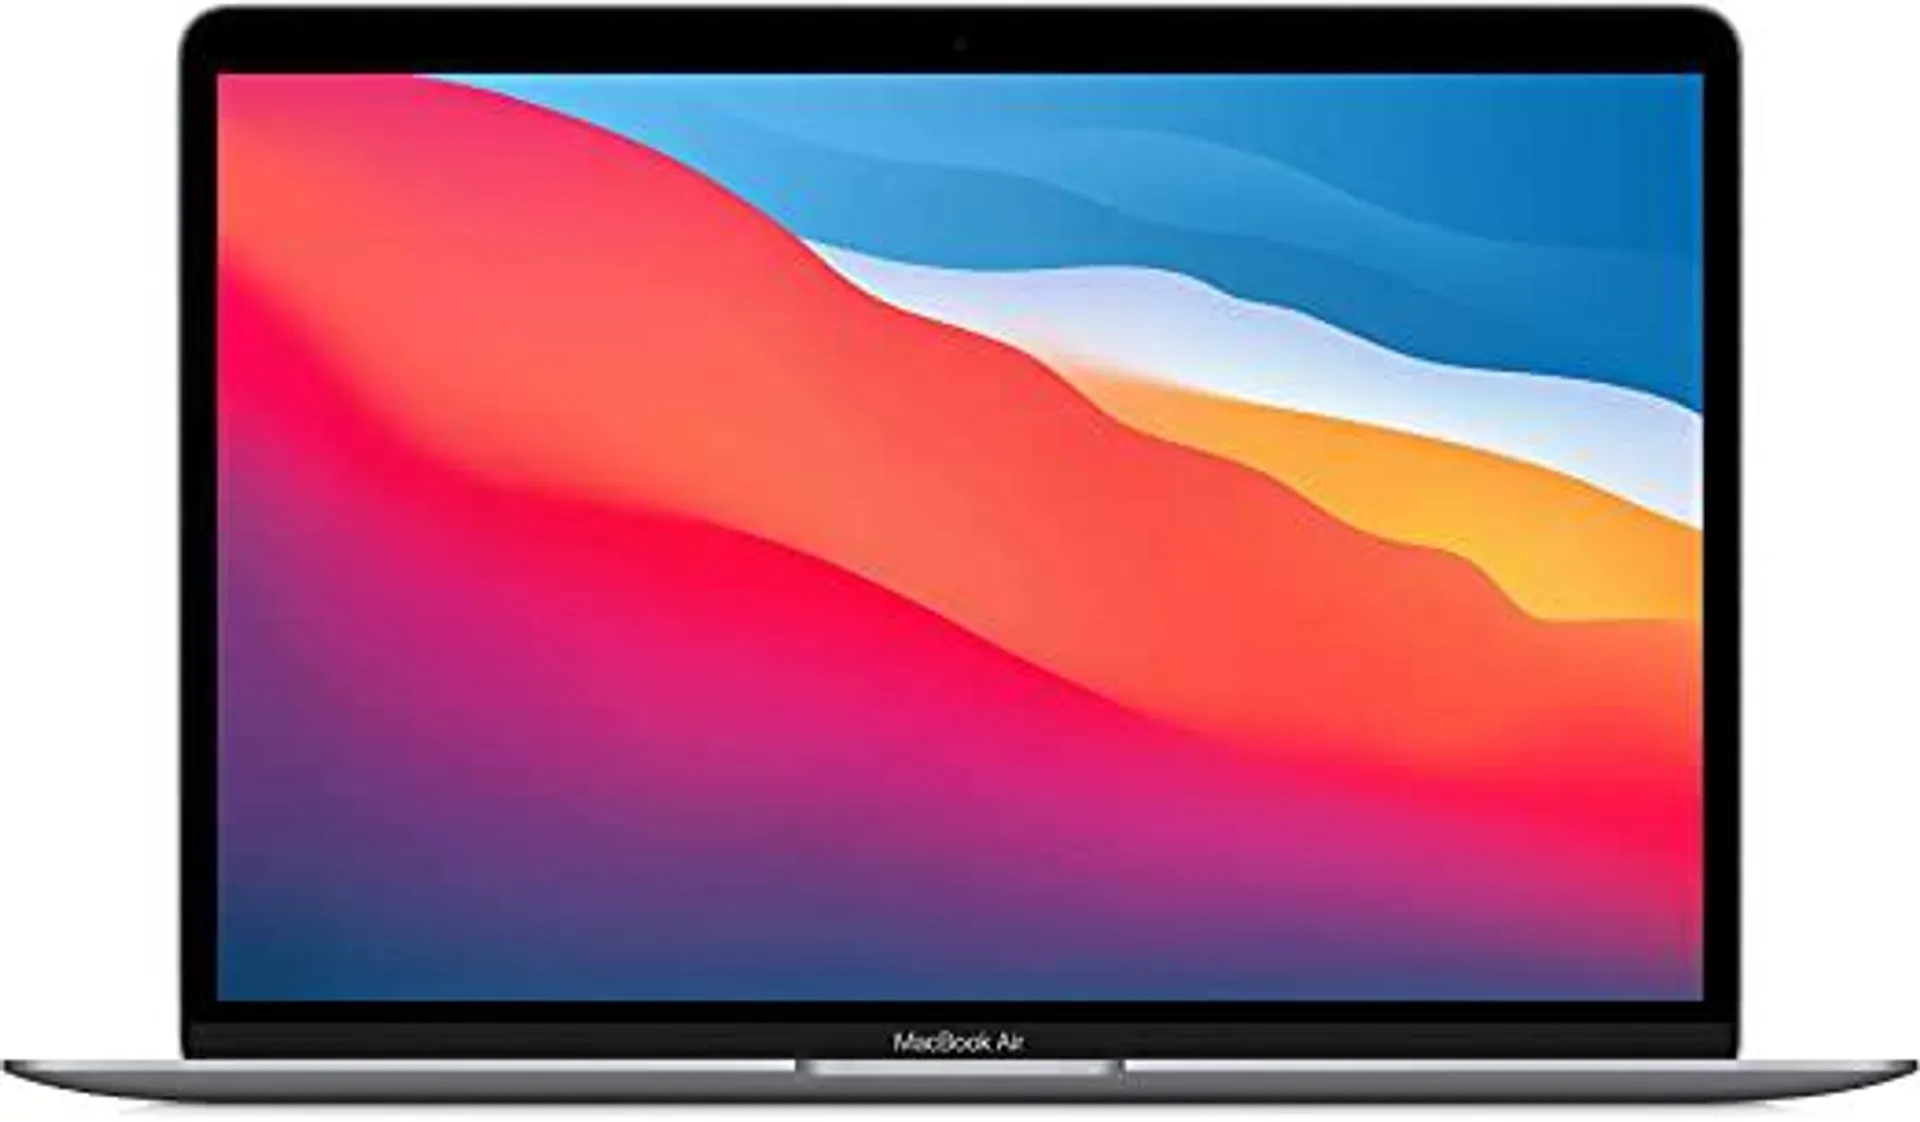 Apple 2020 MacBook Air Laptop M1 Chip, 13" Retina Display, 8GB RAM, 256GB SSD Storage, Backlit Keyboard, FaceTime HD Camera, Touch ID. Works with iPhone/iPad; Space Gray